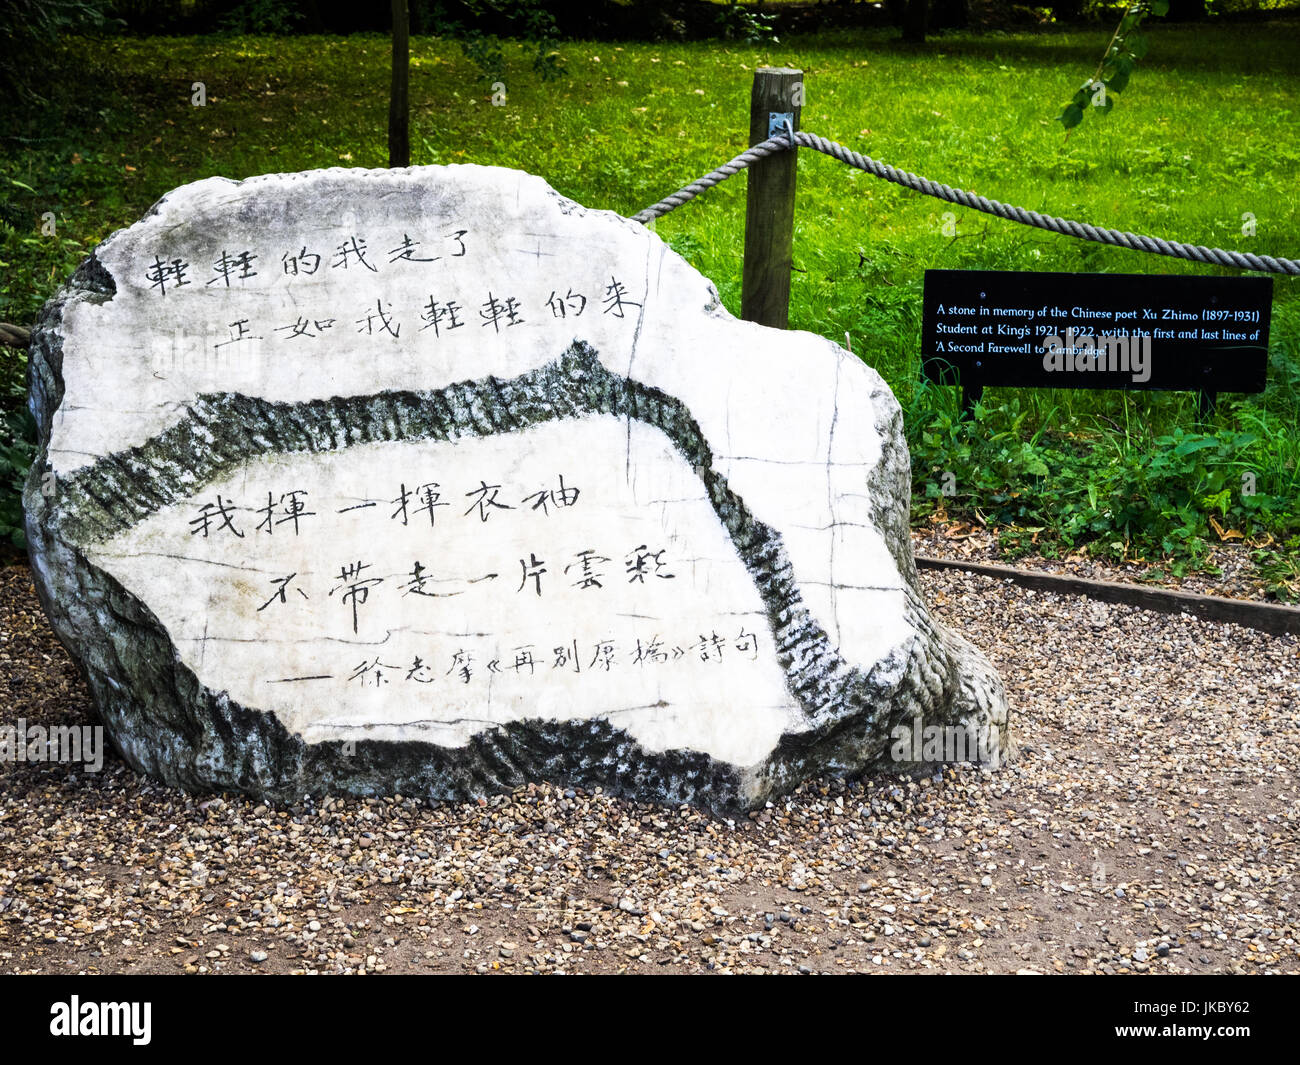 Xu Zhimo Poem  - The first and last lines of the poem Farewell to Cambridge, carved in stone, in the grounds of Kings College, University of Cambridge Stock Photo